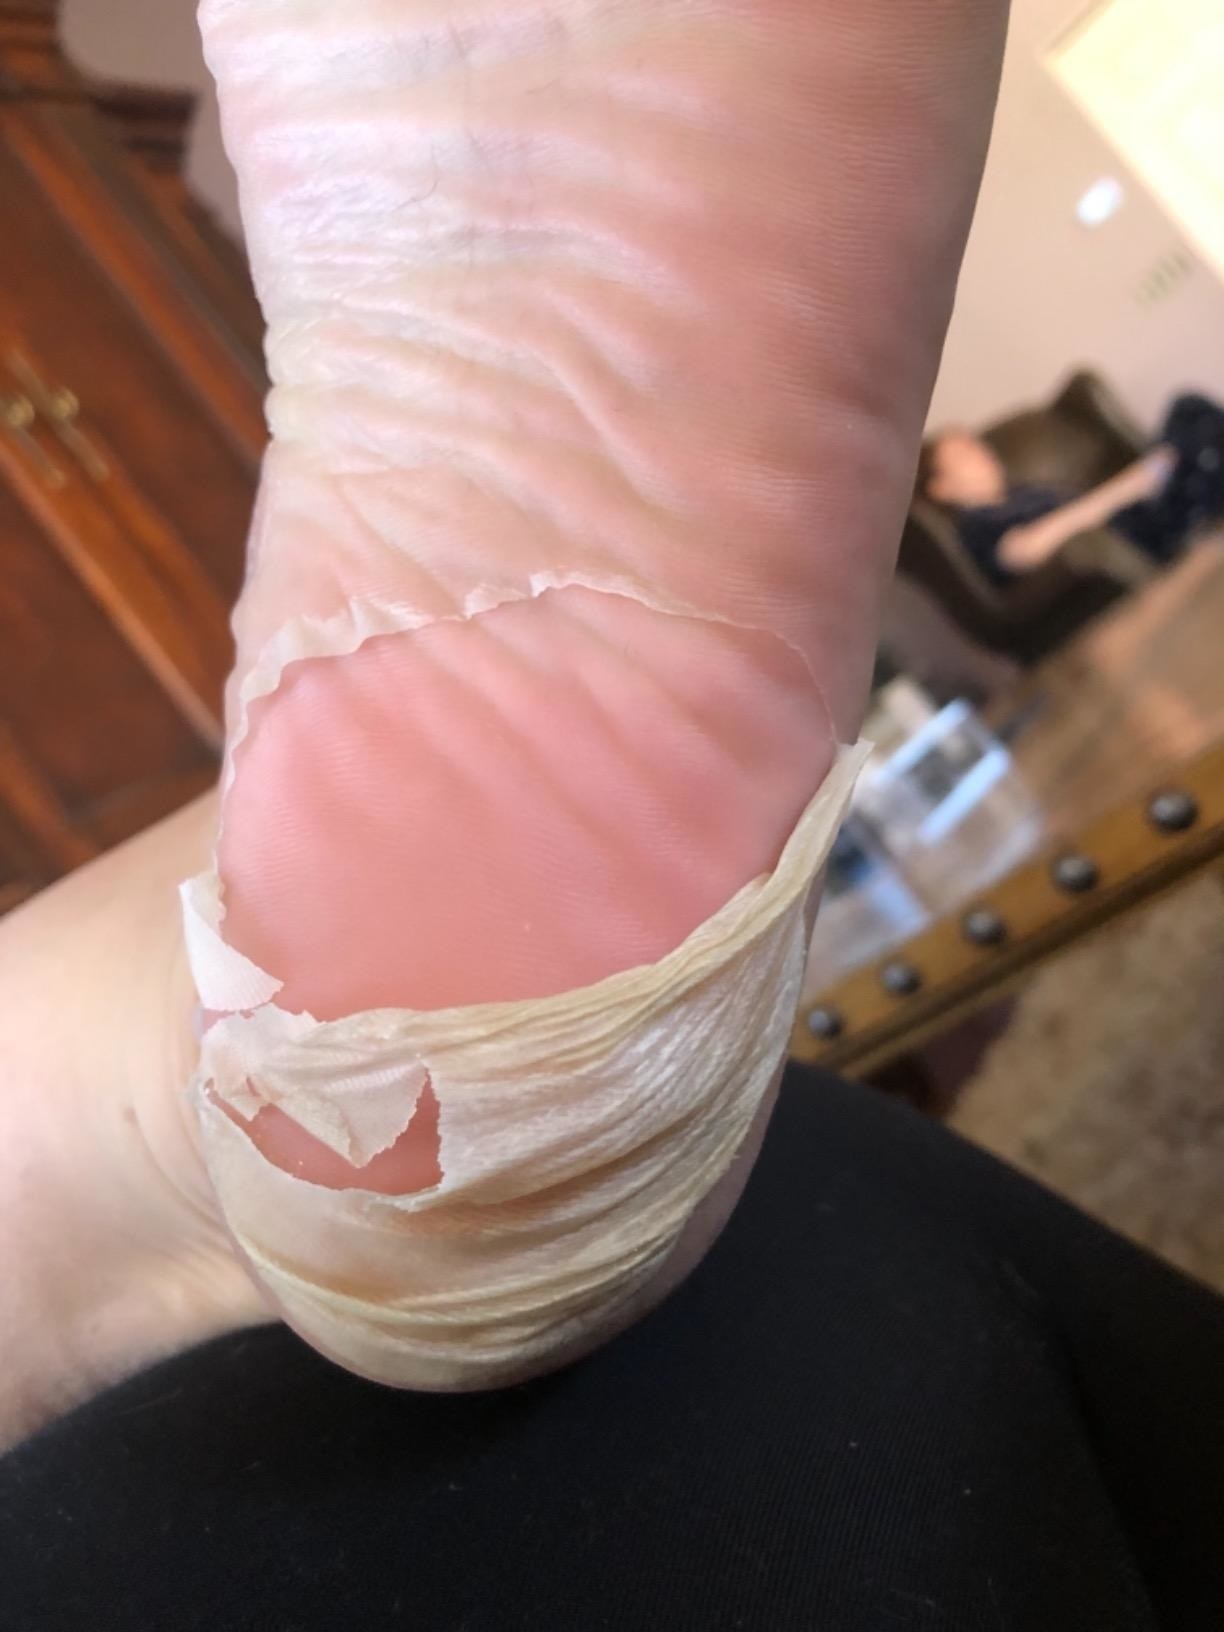 A reviewer&#x27;s photo of their dead skin coming off their feet